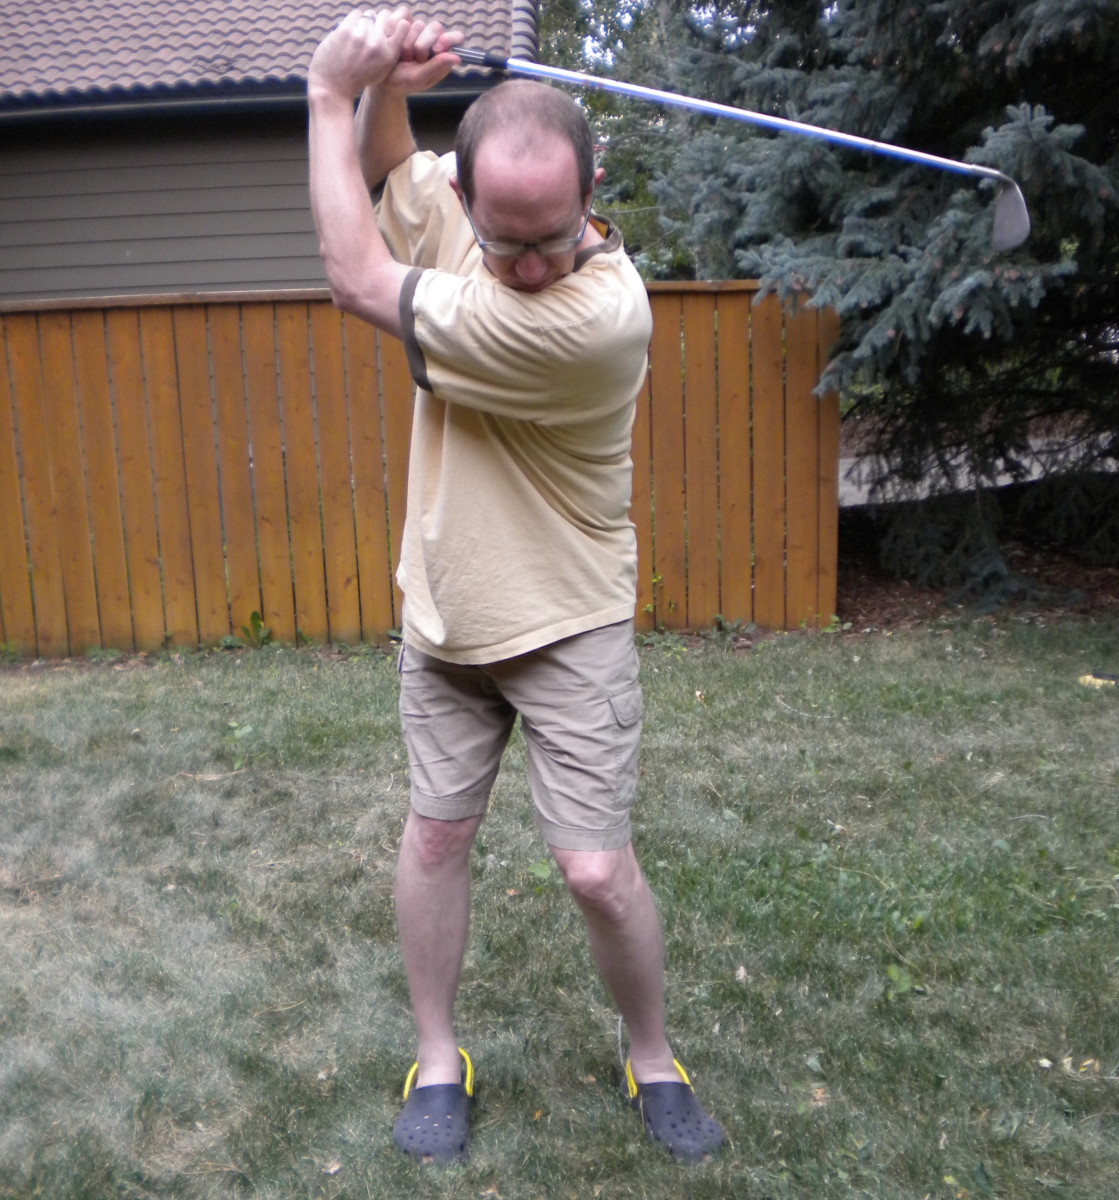 Typical overswing. Notice the bent left arm. The longer the swing, the more things break down, leading to bad shots.